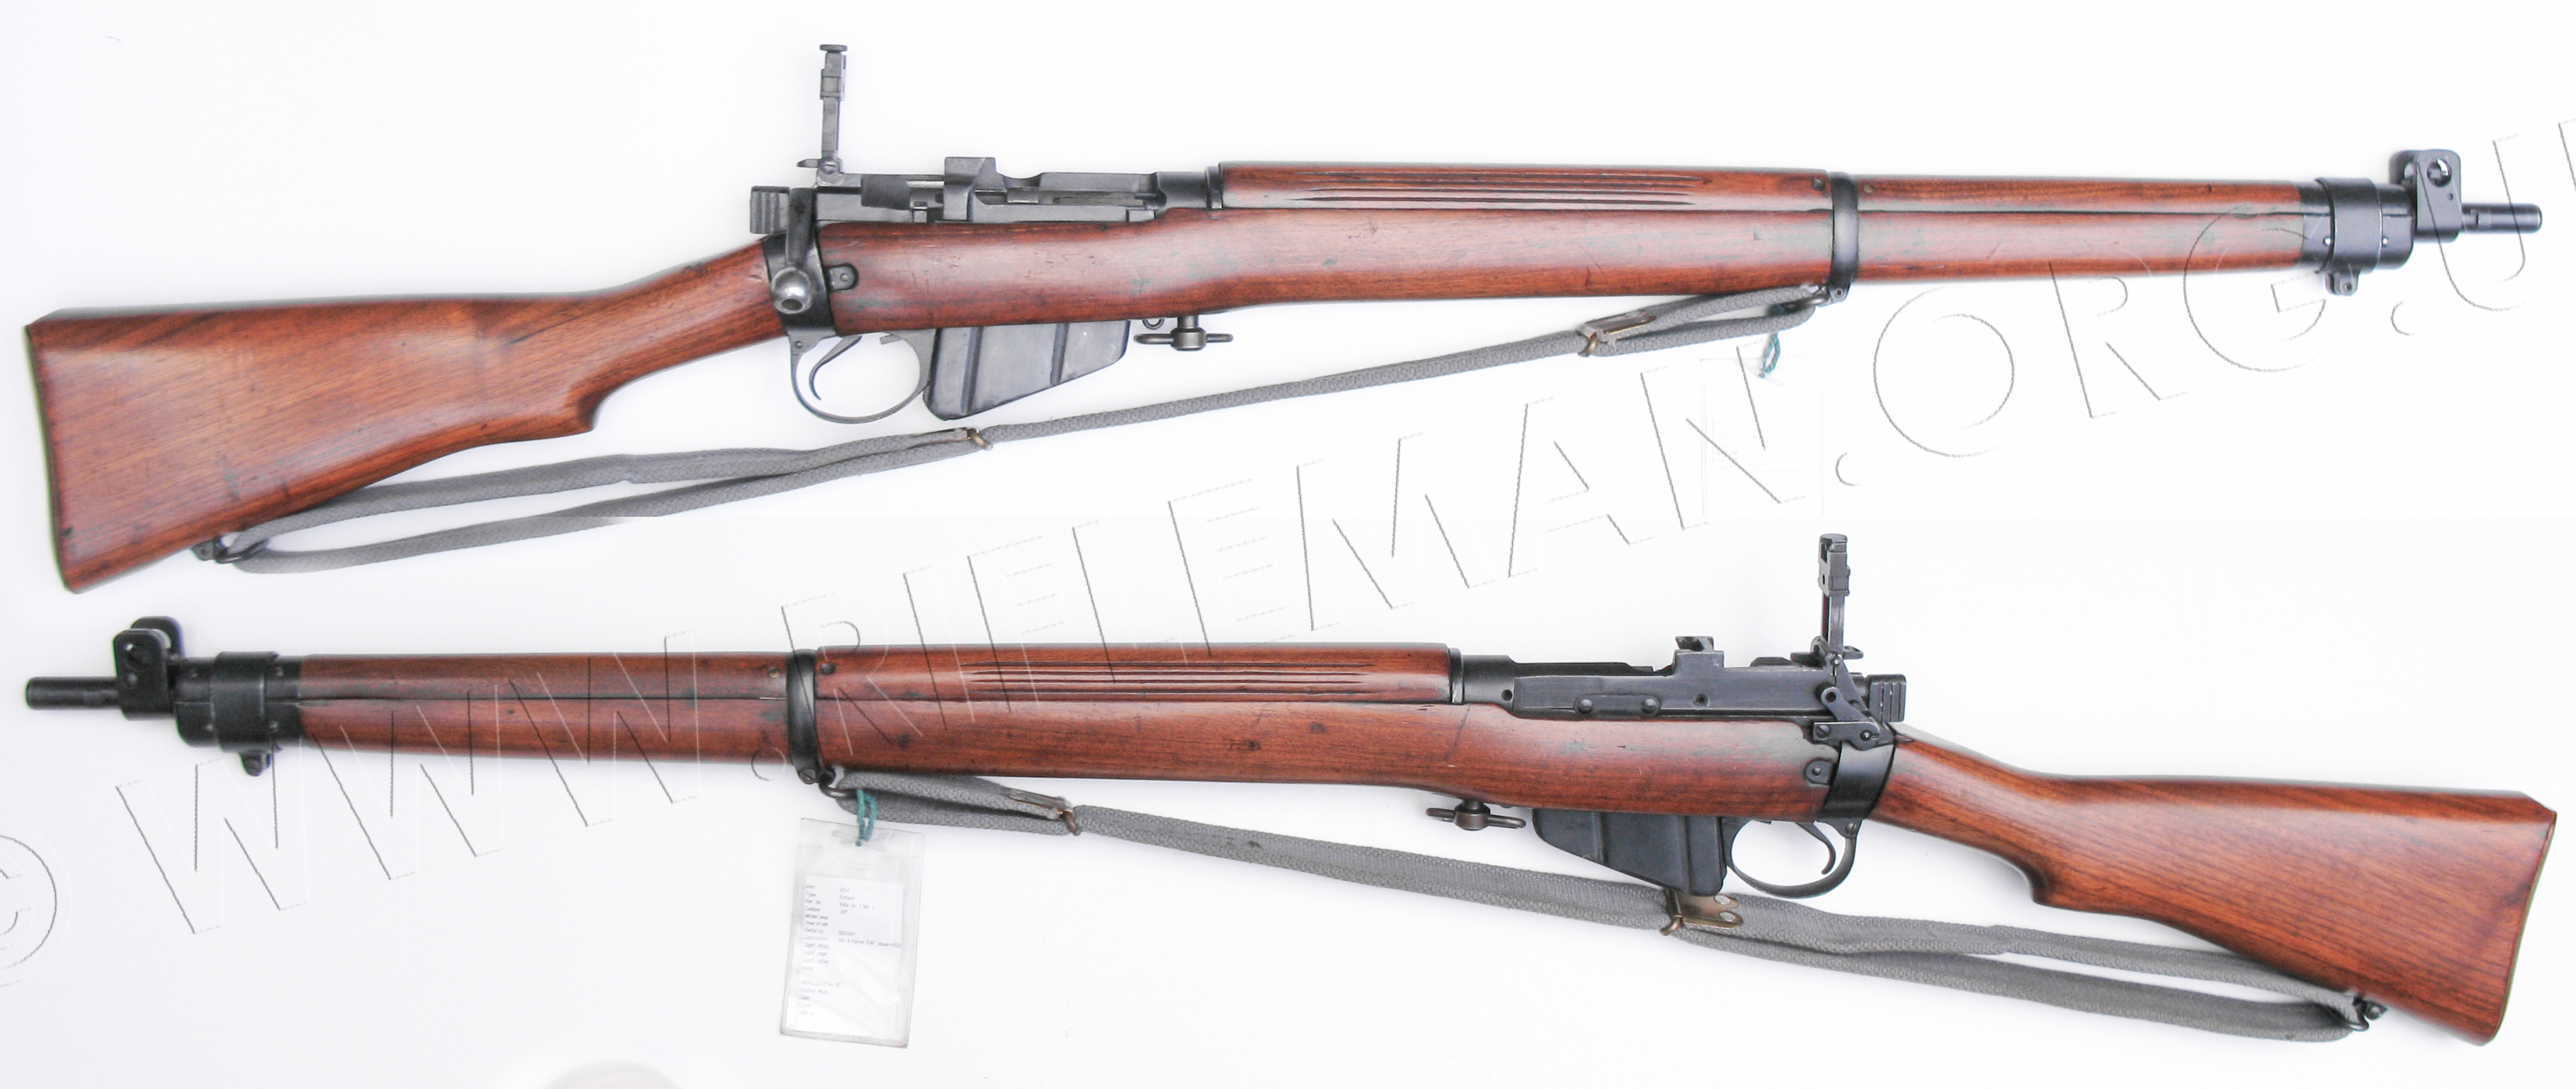 Lee Enfield No4 Mk1*, The rounds were either loaded separat…